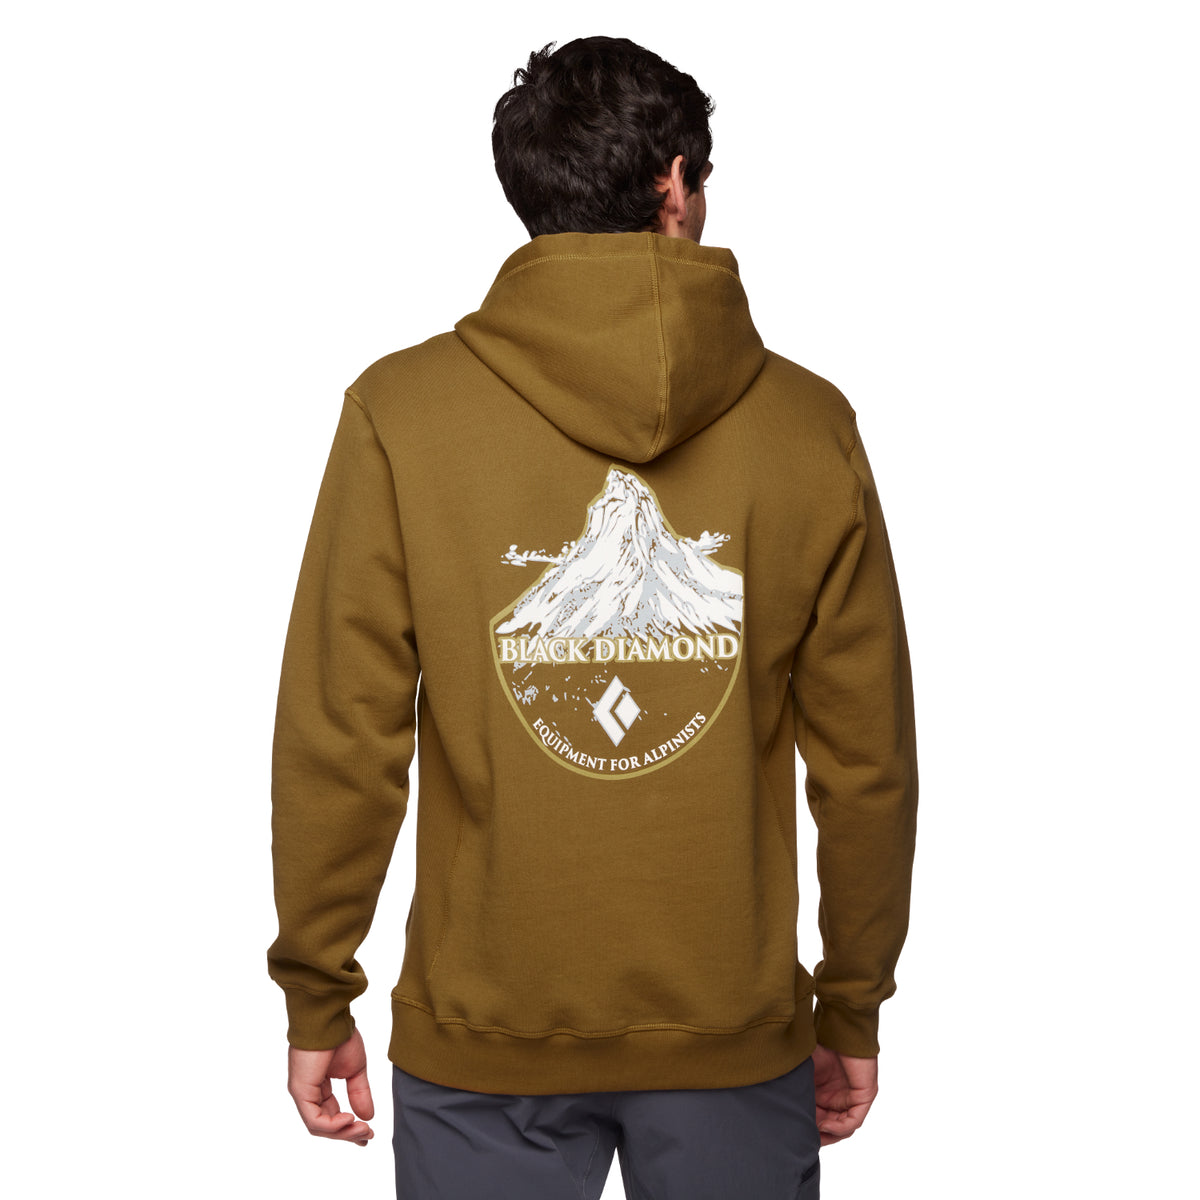 Black Diamond Mountain Badge Hoody in dark curry showing graphic on back